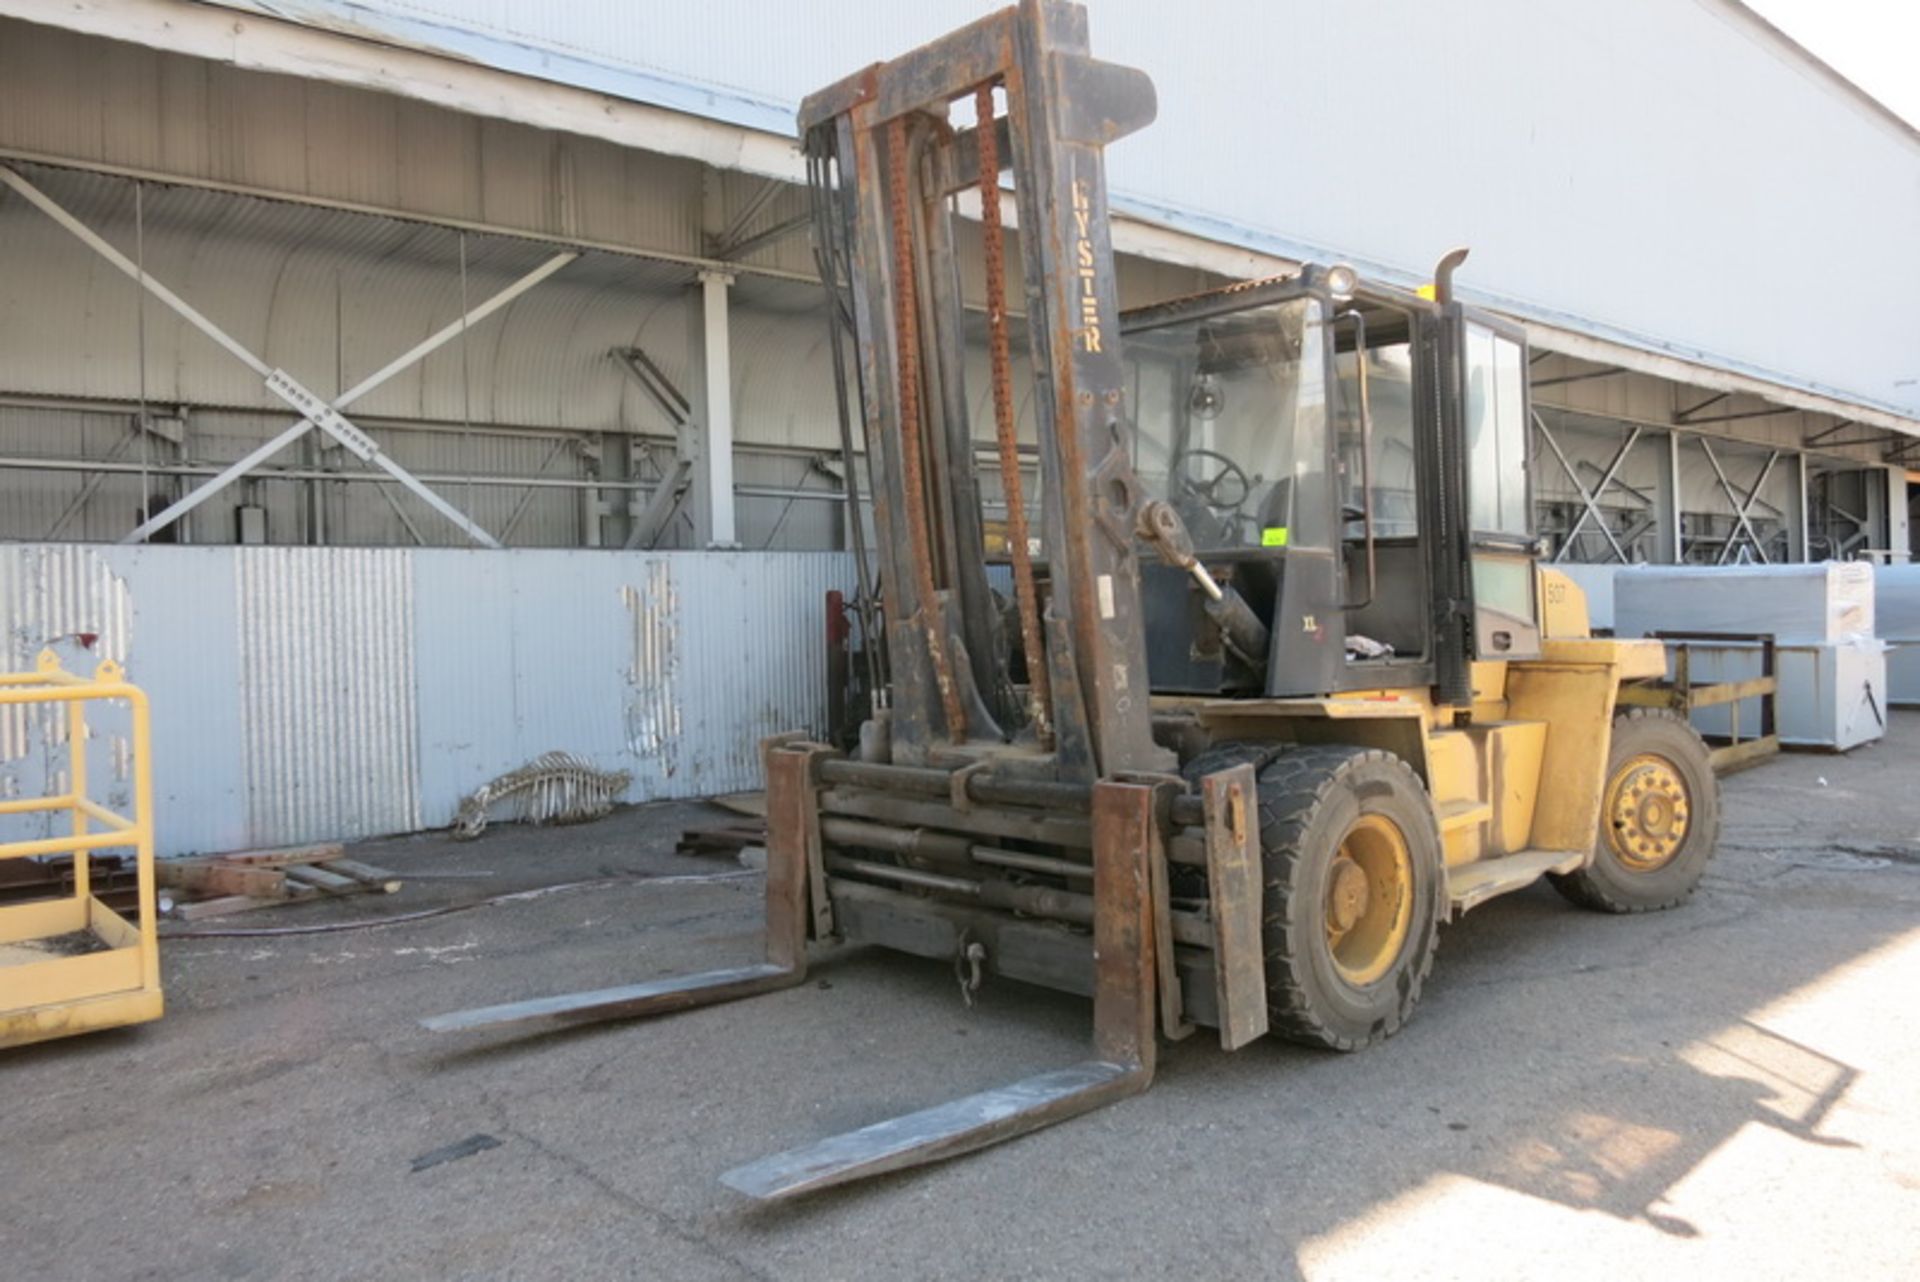 Hyster forklift, model H280XL, s/n E007D03857W, 27,500 lb. cap., 2 stage mast, 183" lift, solid